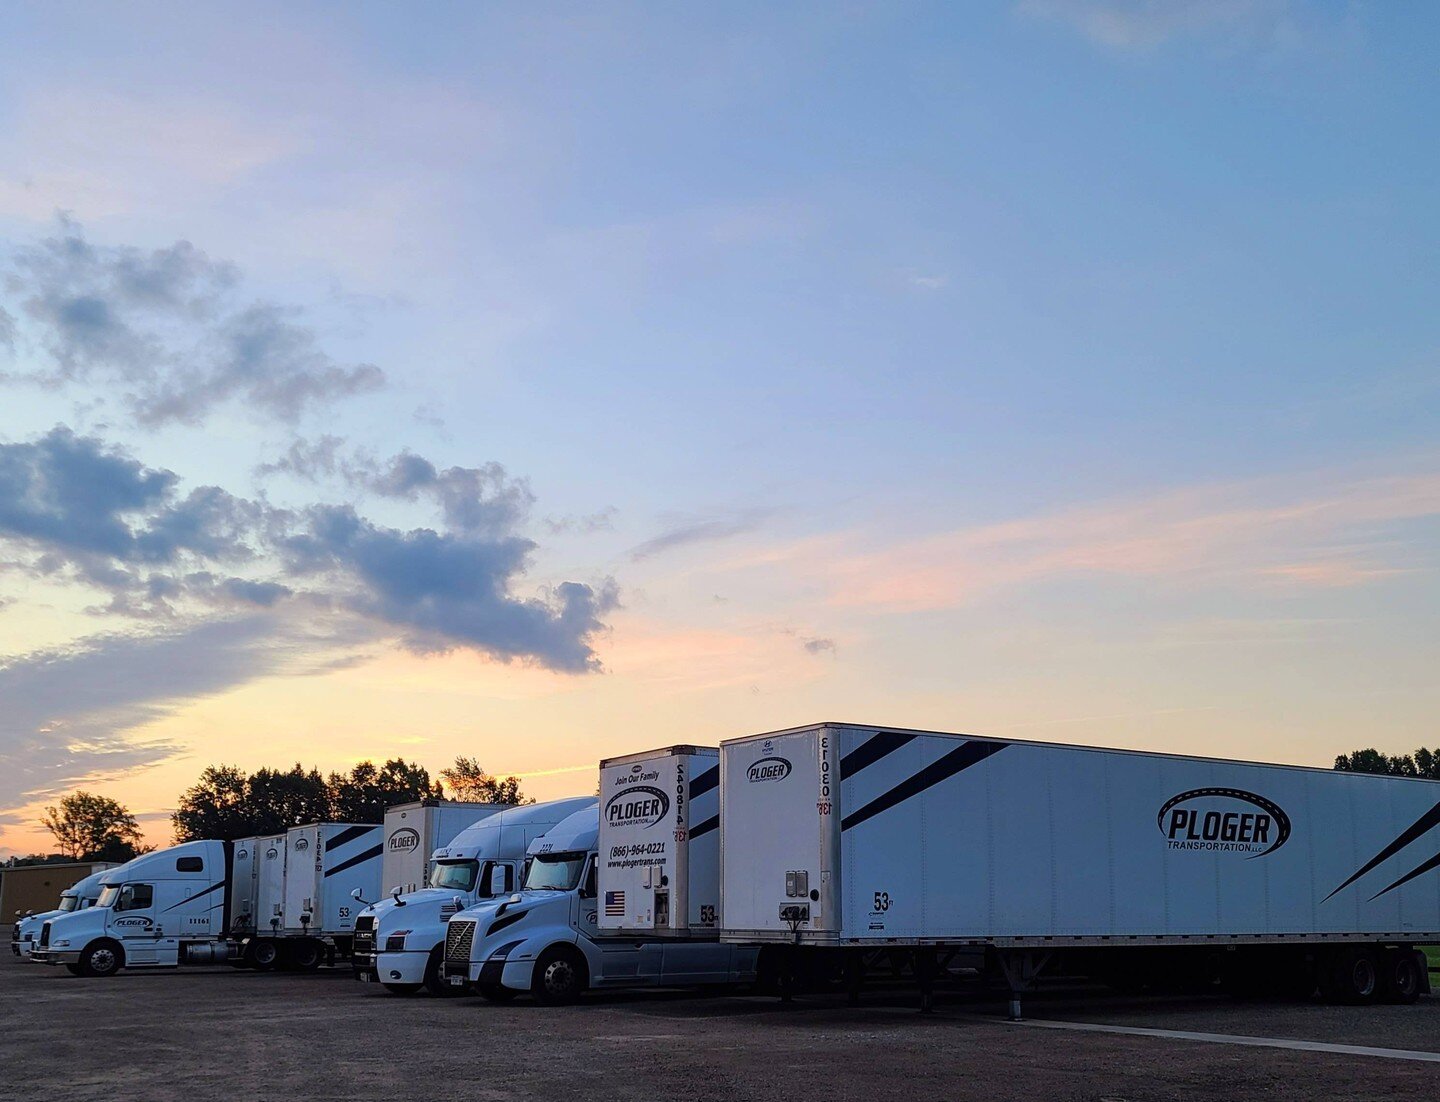 Good morning from Norwalk! We have the coffee on and everyone is lined up and ready to pull some freight this morning!

Happy Thursday everyone!